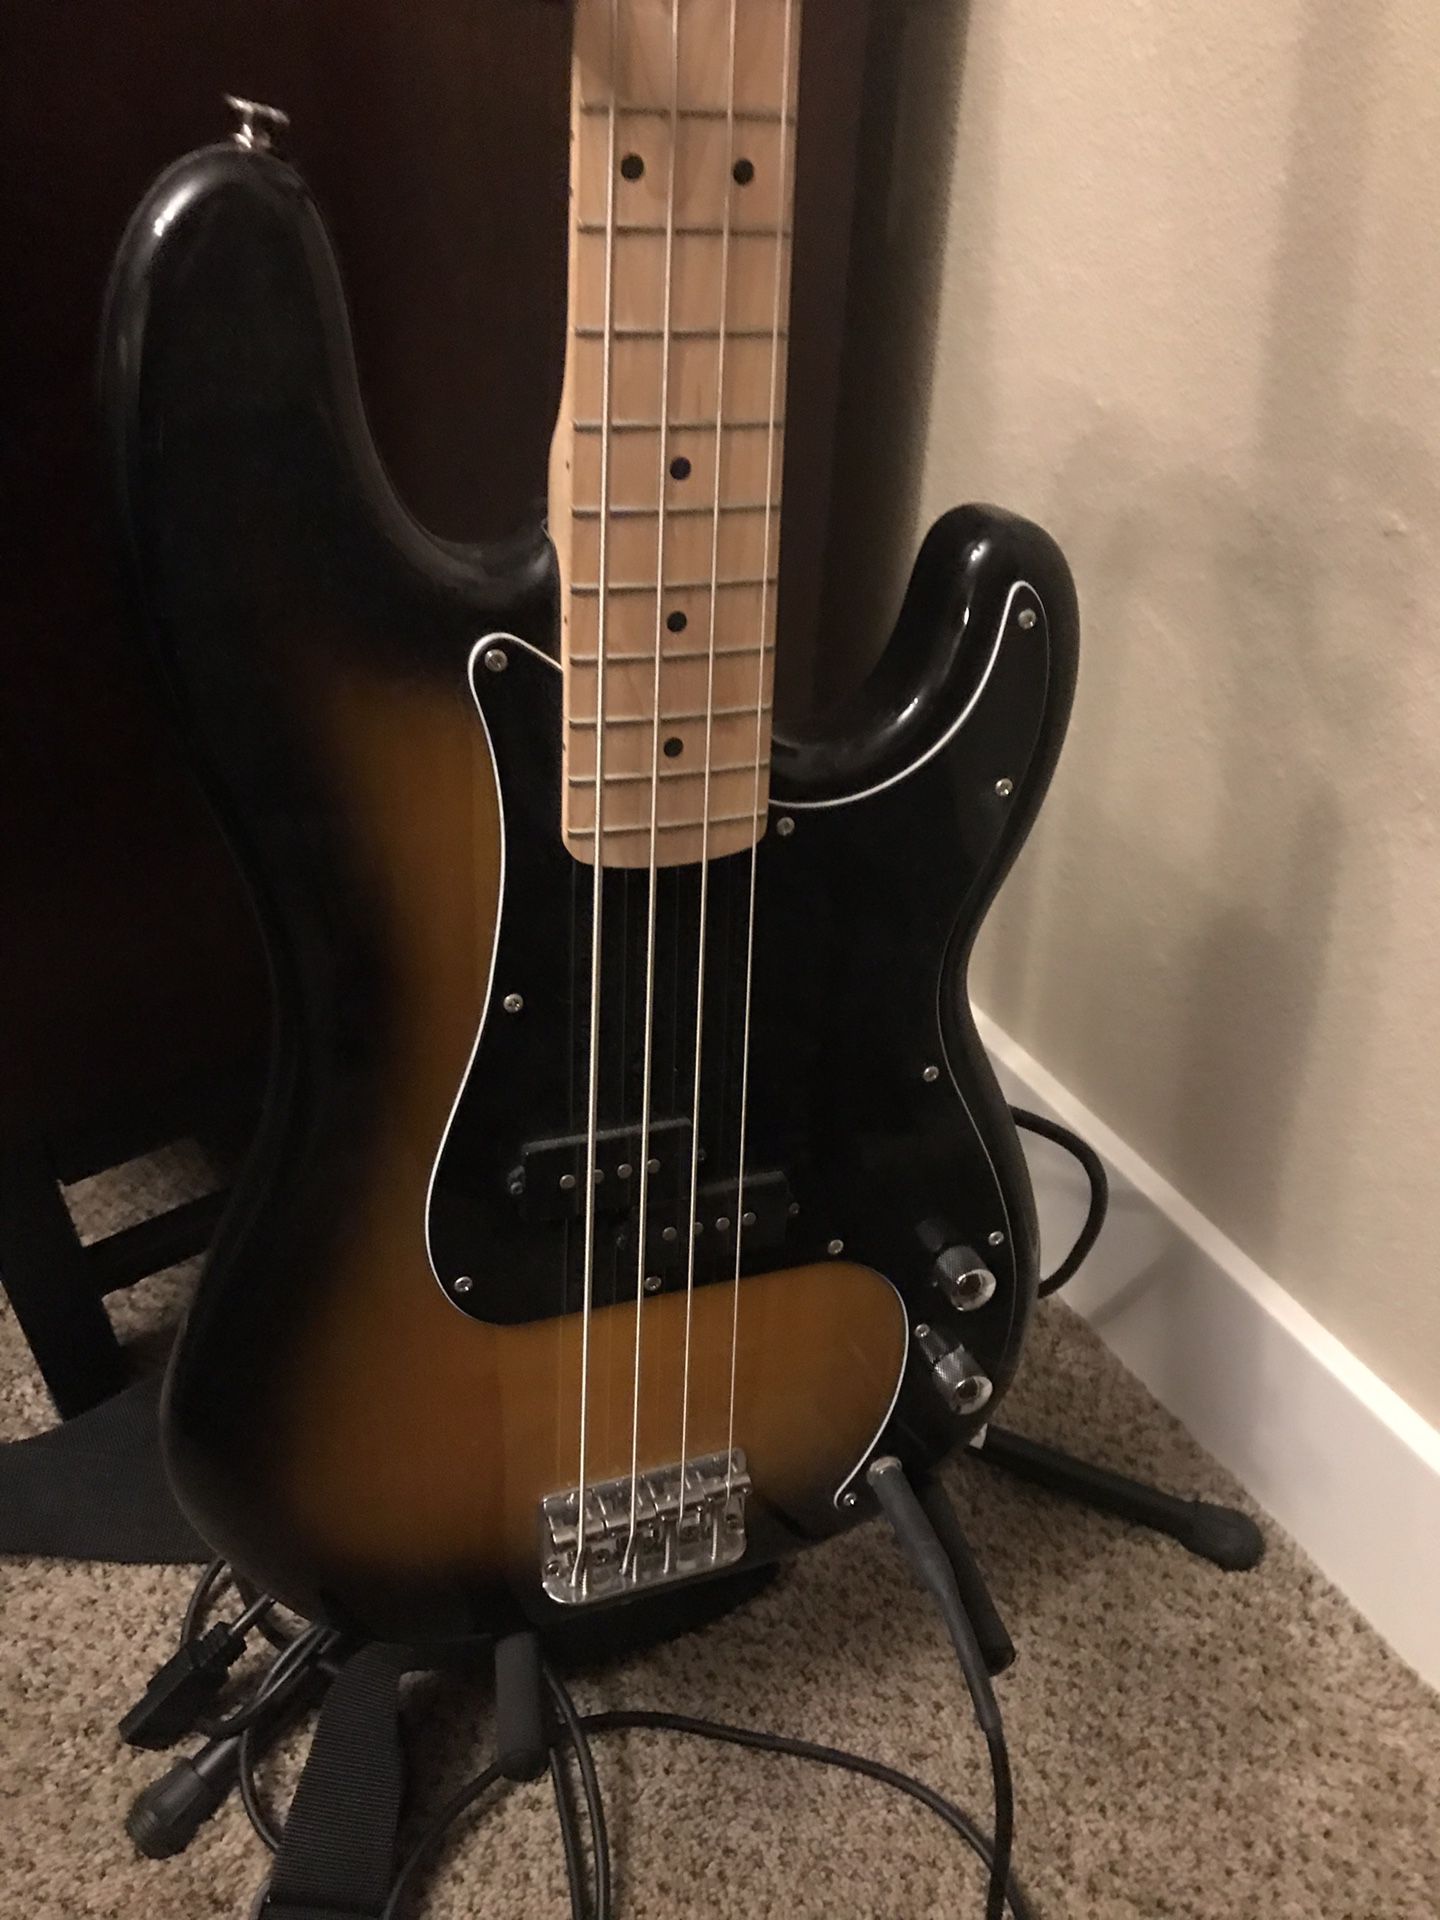 Squier p bass with fender amp guitar bag cord